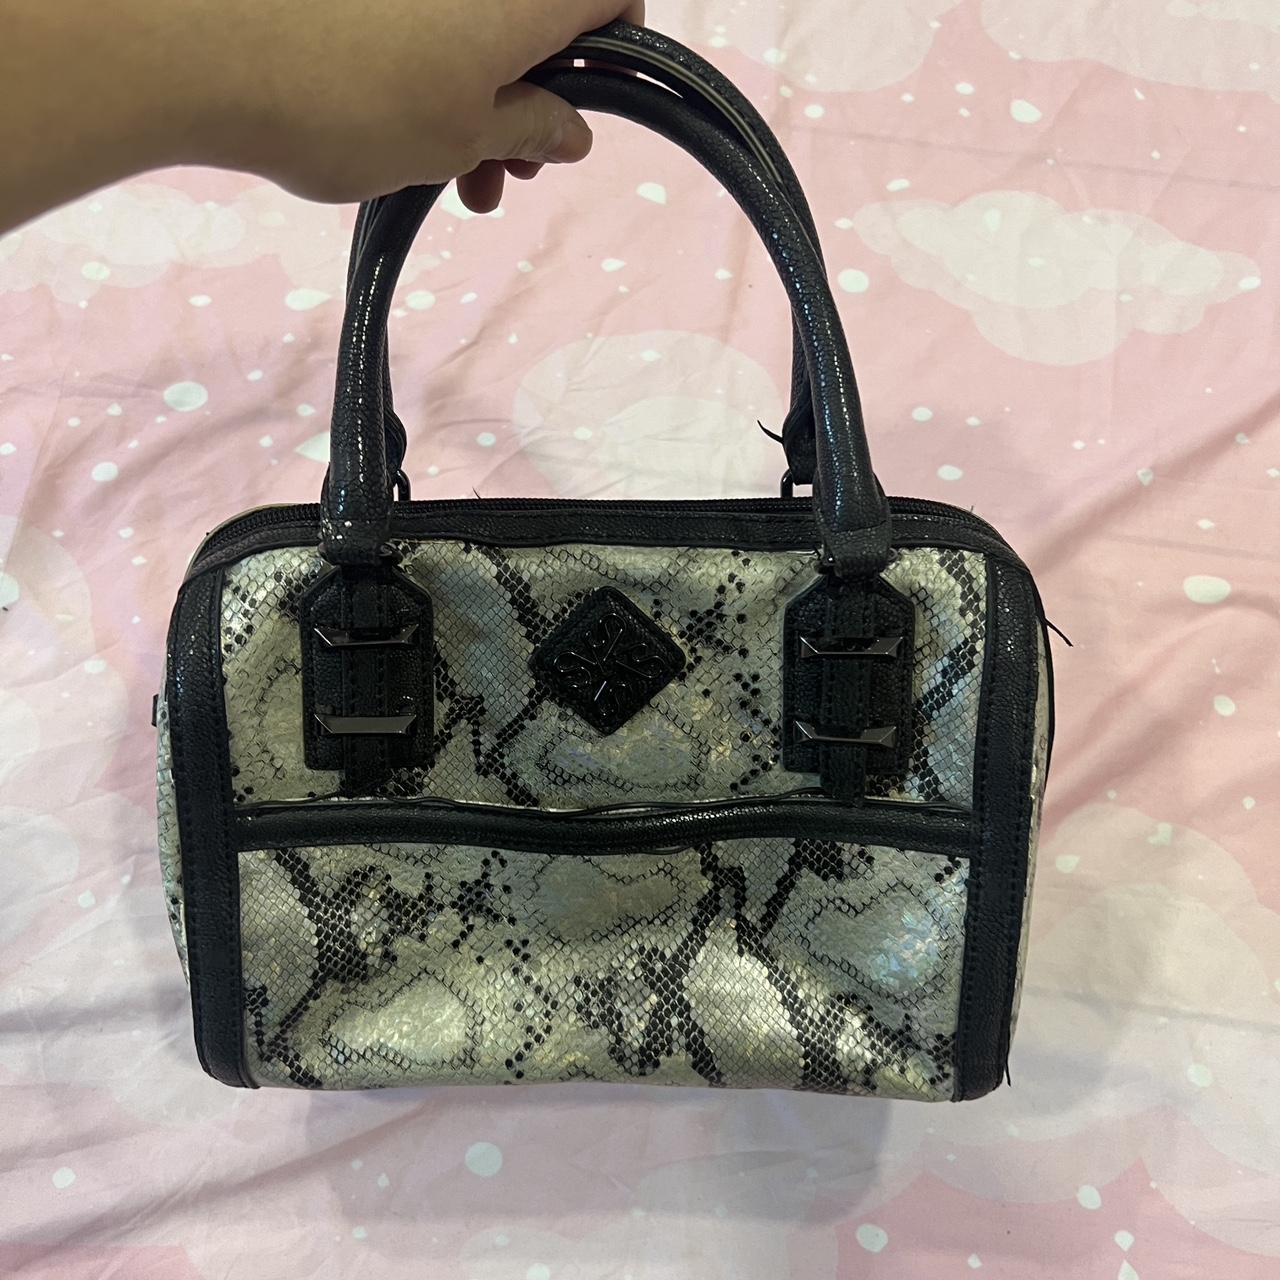 Simply Vera Vera Wang Camouflage Faux Leather - Depop